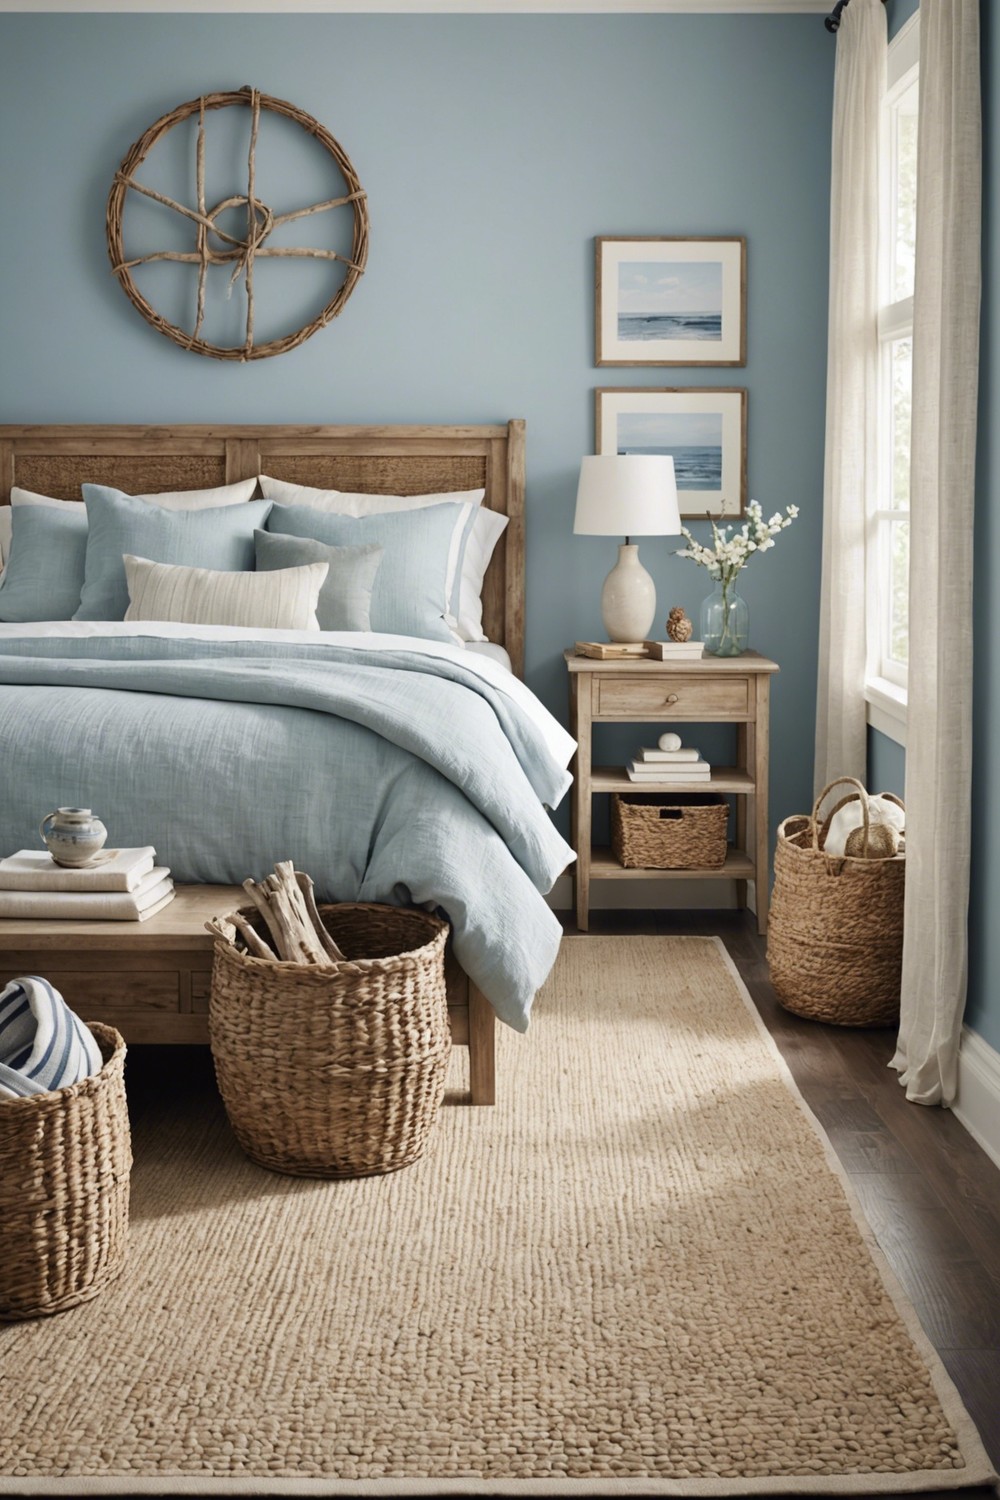 Coastal Colors for a Soothing Ambiance